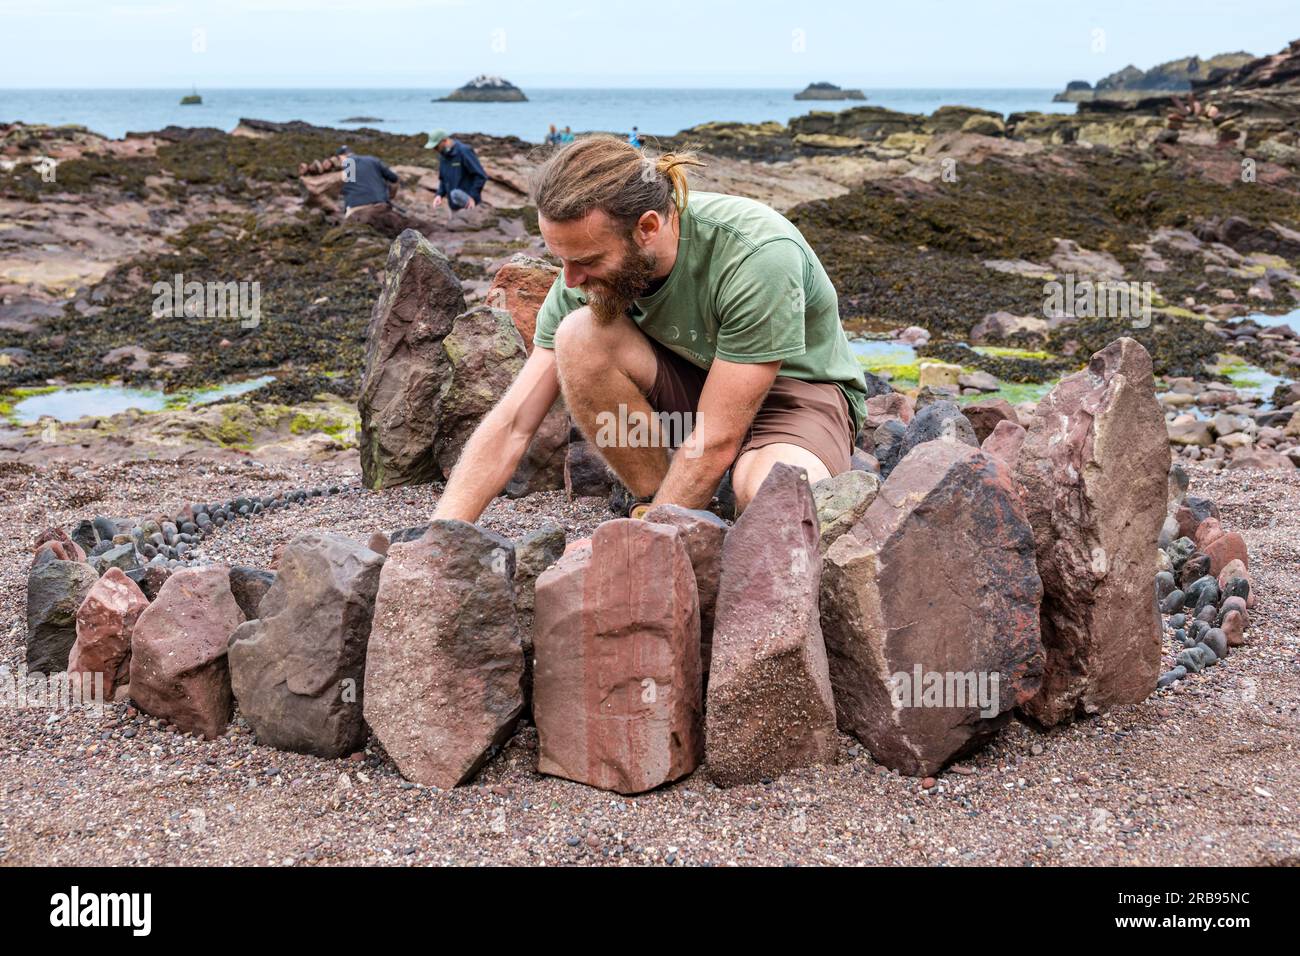 Dunbar, East Lothian, Scotland, UK, 8th July 2023. European Stone Stacking Championship: the final days of the European Land Art Festival with land artists creating land art. Pictured: Land artist Jon Foreman creates a henge-like sculpture. Credit: Sally Anderson/Alamy Live News Stock Photo